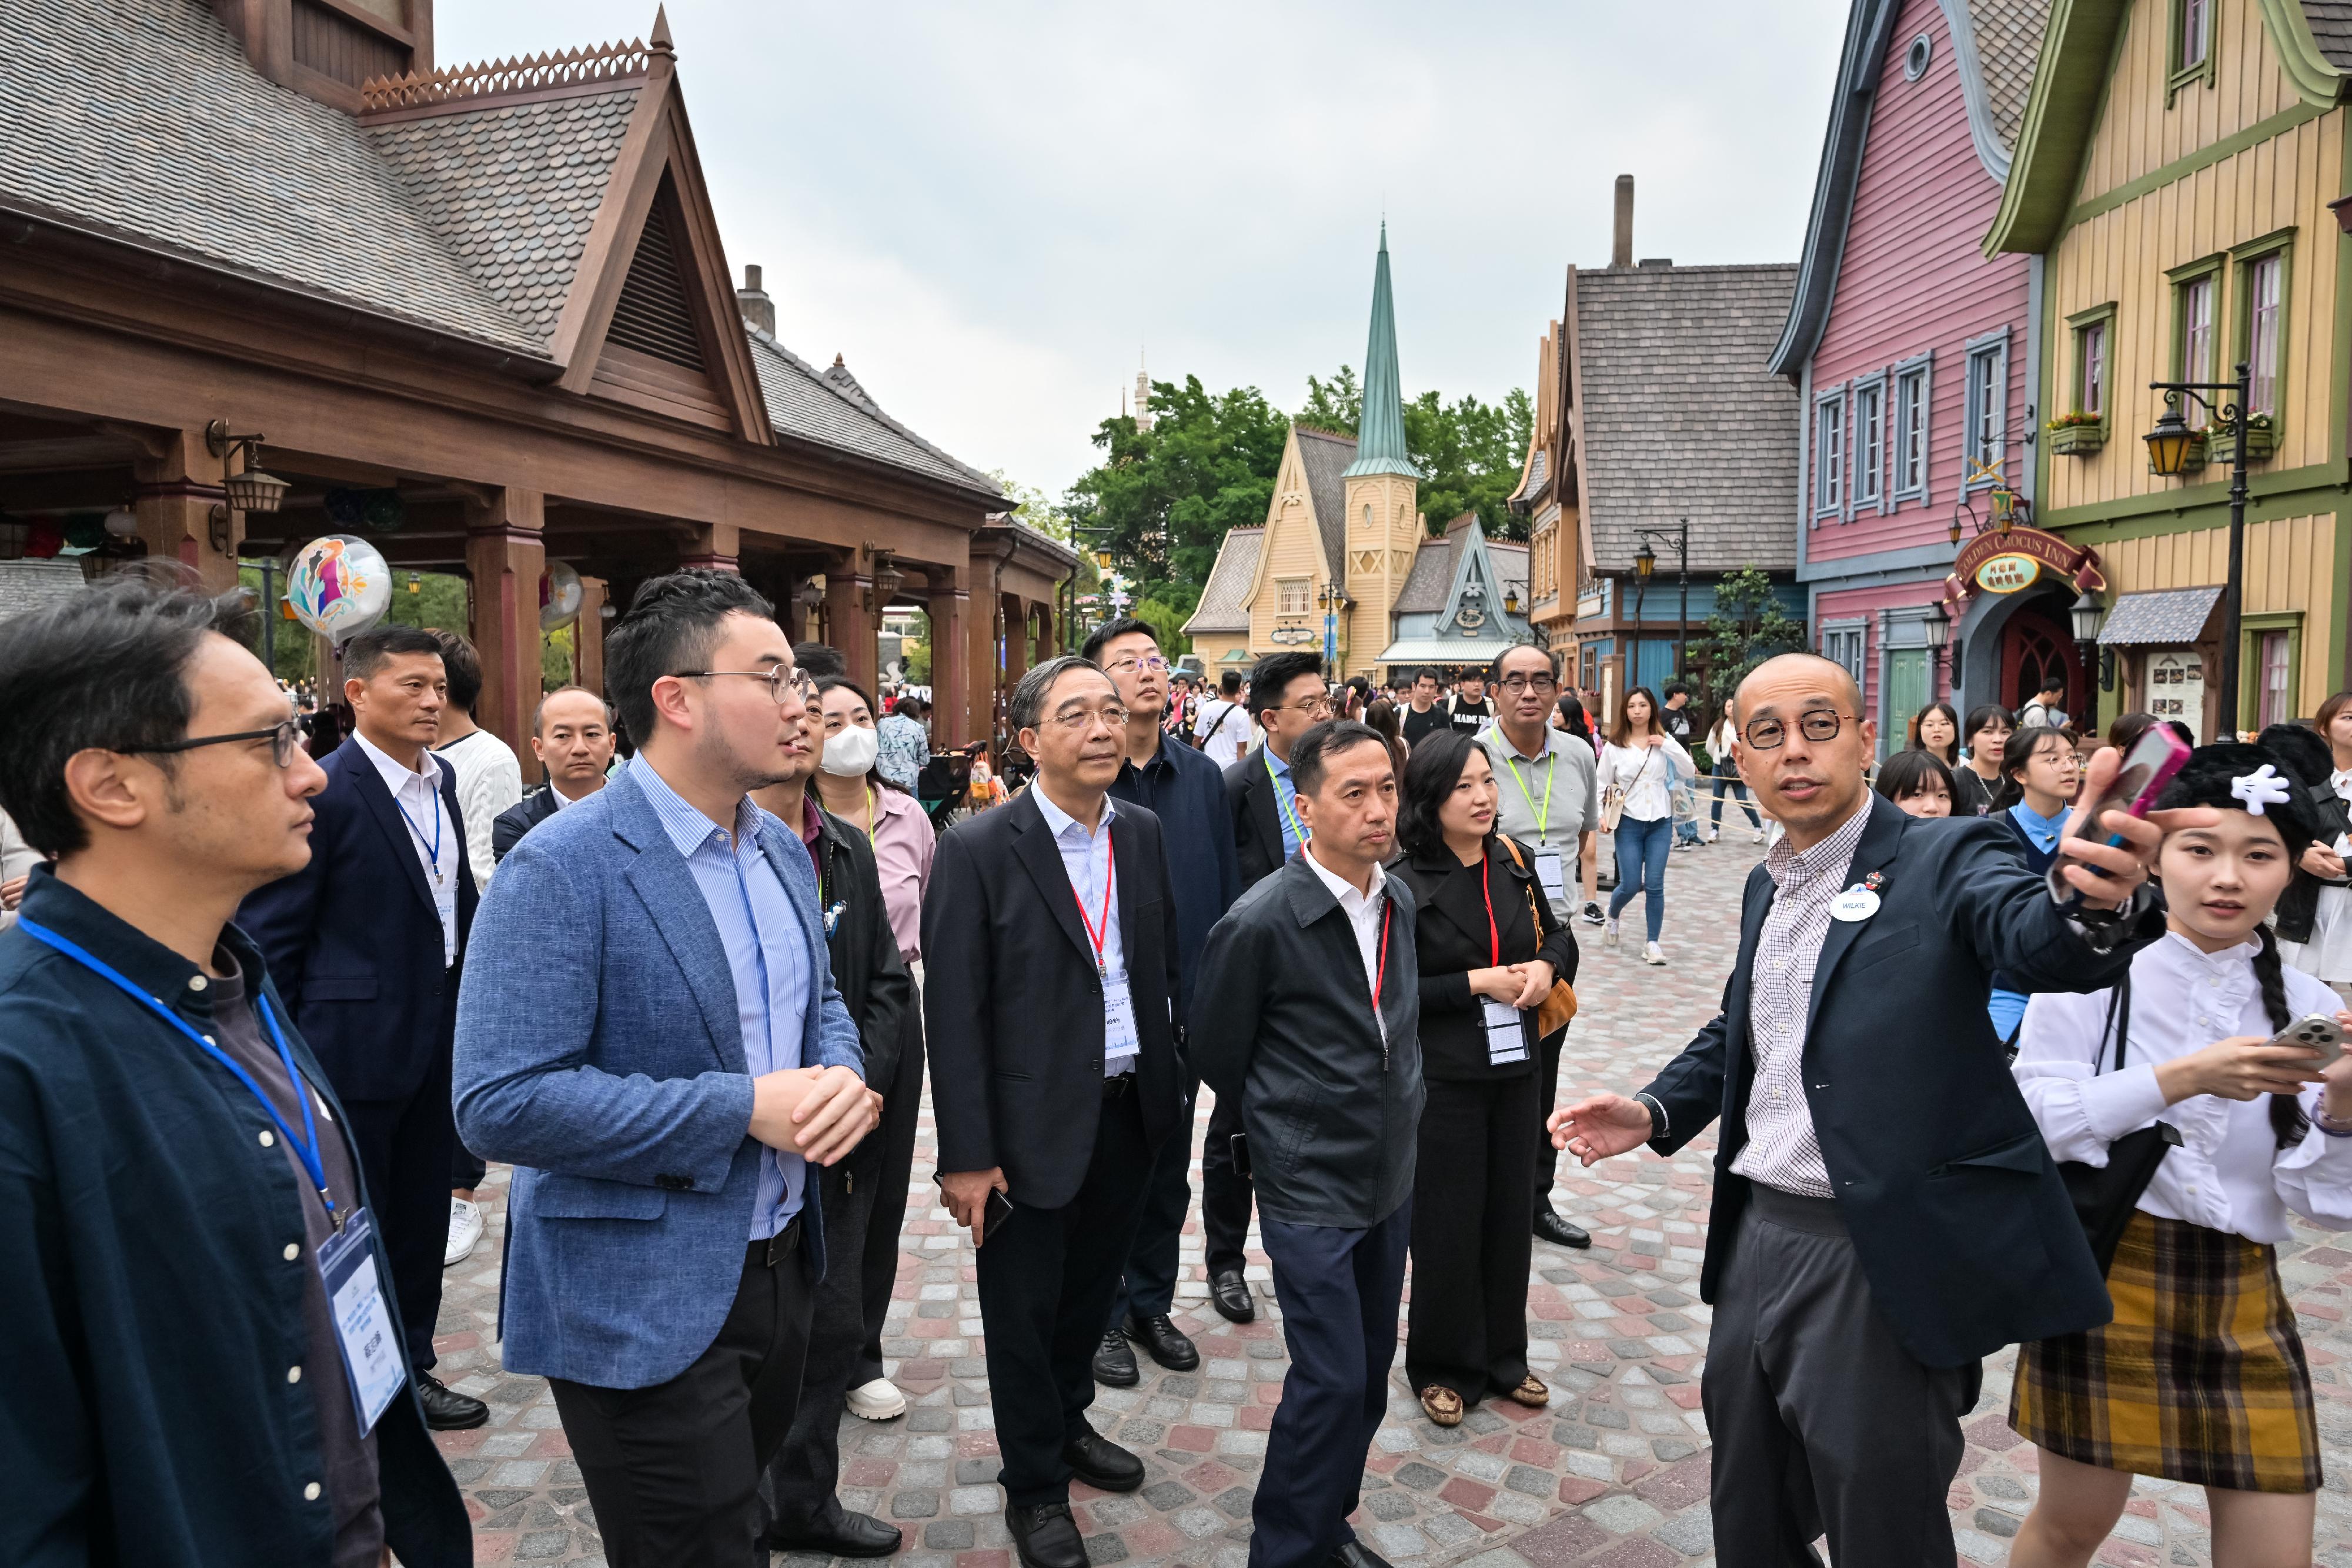 The joint meeting of the Joint Regulatory Alliance of the Tourism Market of 9+2 Cities in the Guangdong-Hong Kong-Macao Greater Bay Area (JRA) was held for two days in Hong Kong. Photo shows the representatives of the JRA visiting Hong Kong Disneyland yesterday (November 30) to learn about the latest enhancements and updates of its facilities.